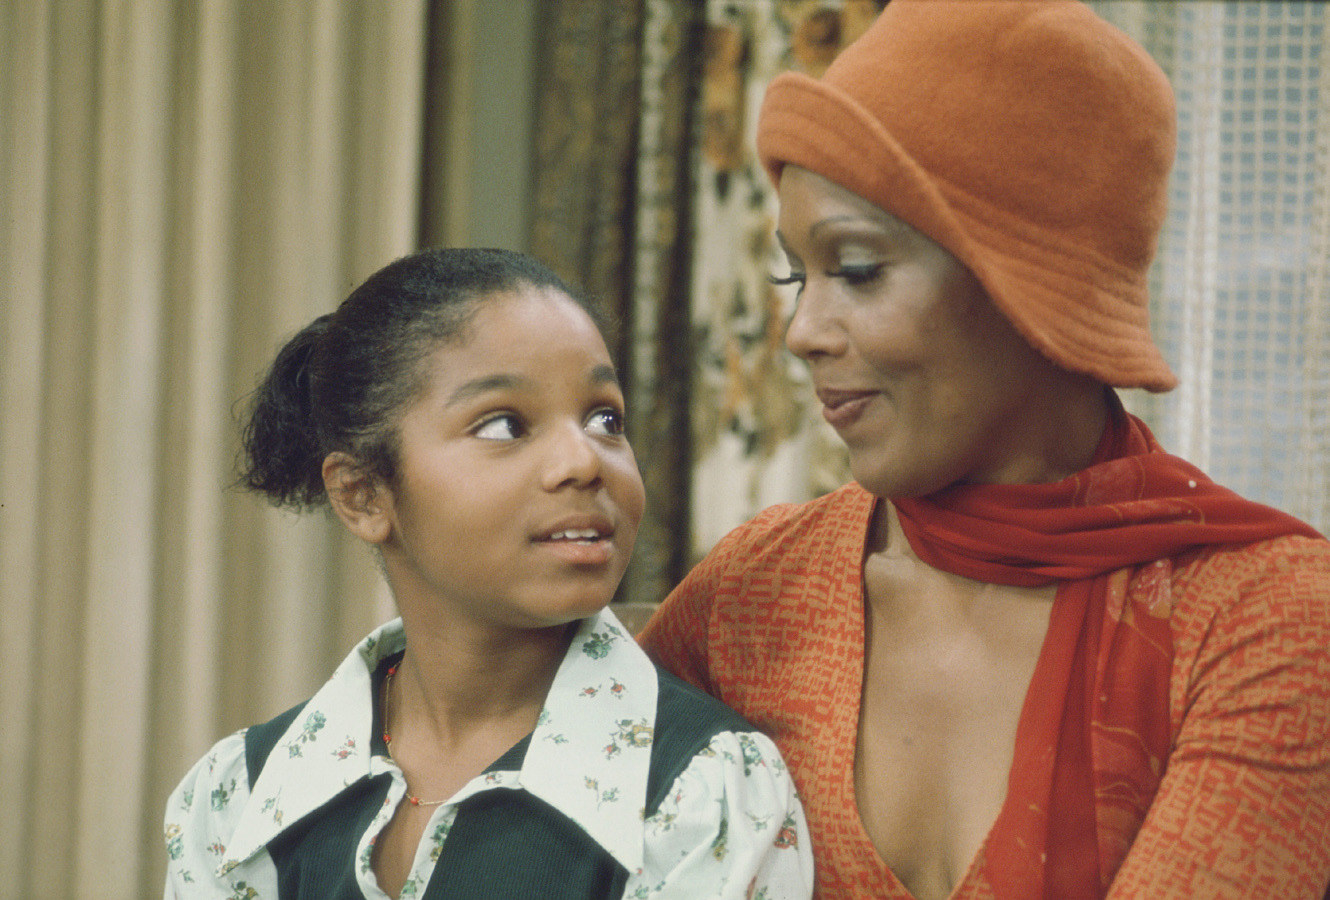 American actresses Janet Jackson (left) and Ja&#x27;net DuBois in a scene from the television series &#x27;Good Times,&#x27; Los Angeles, California, late 1970s